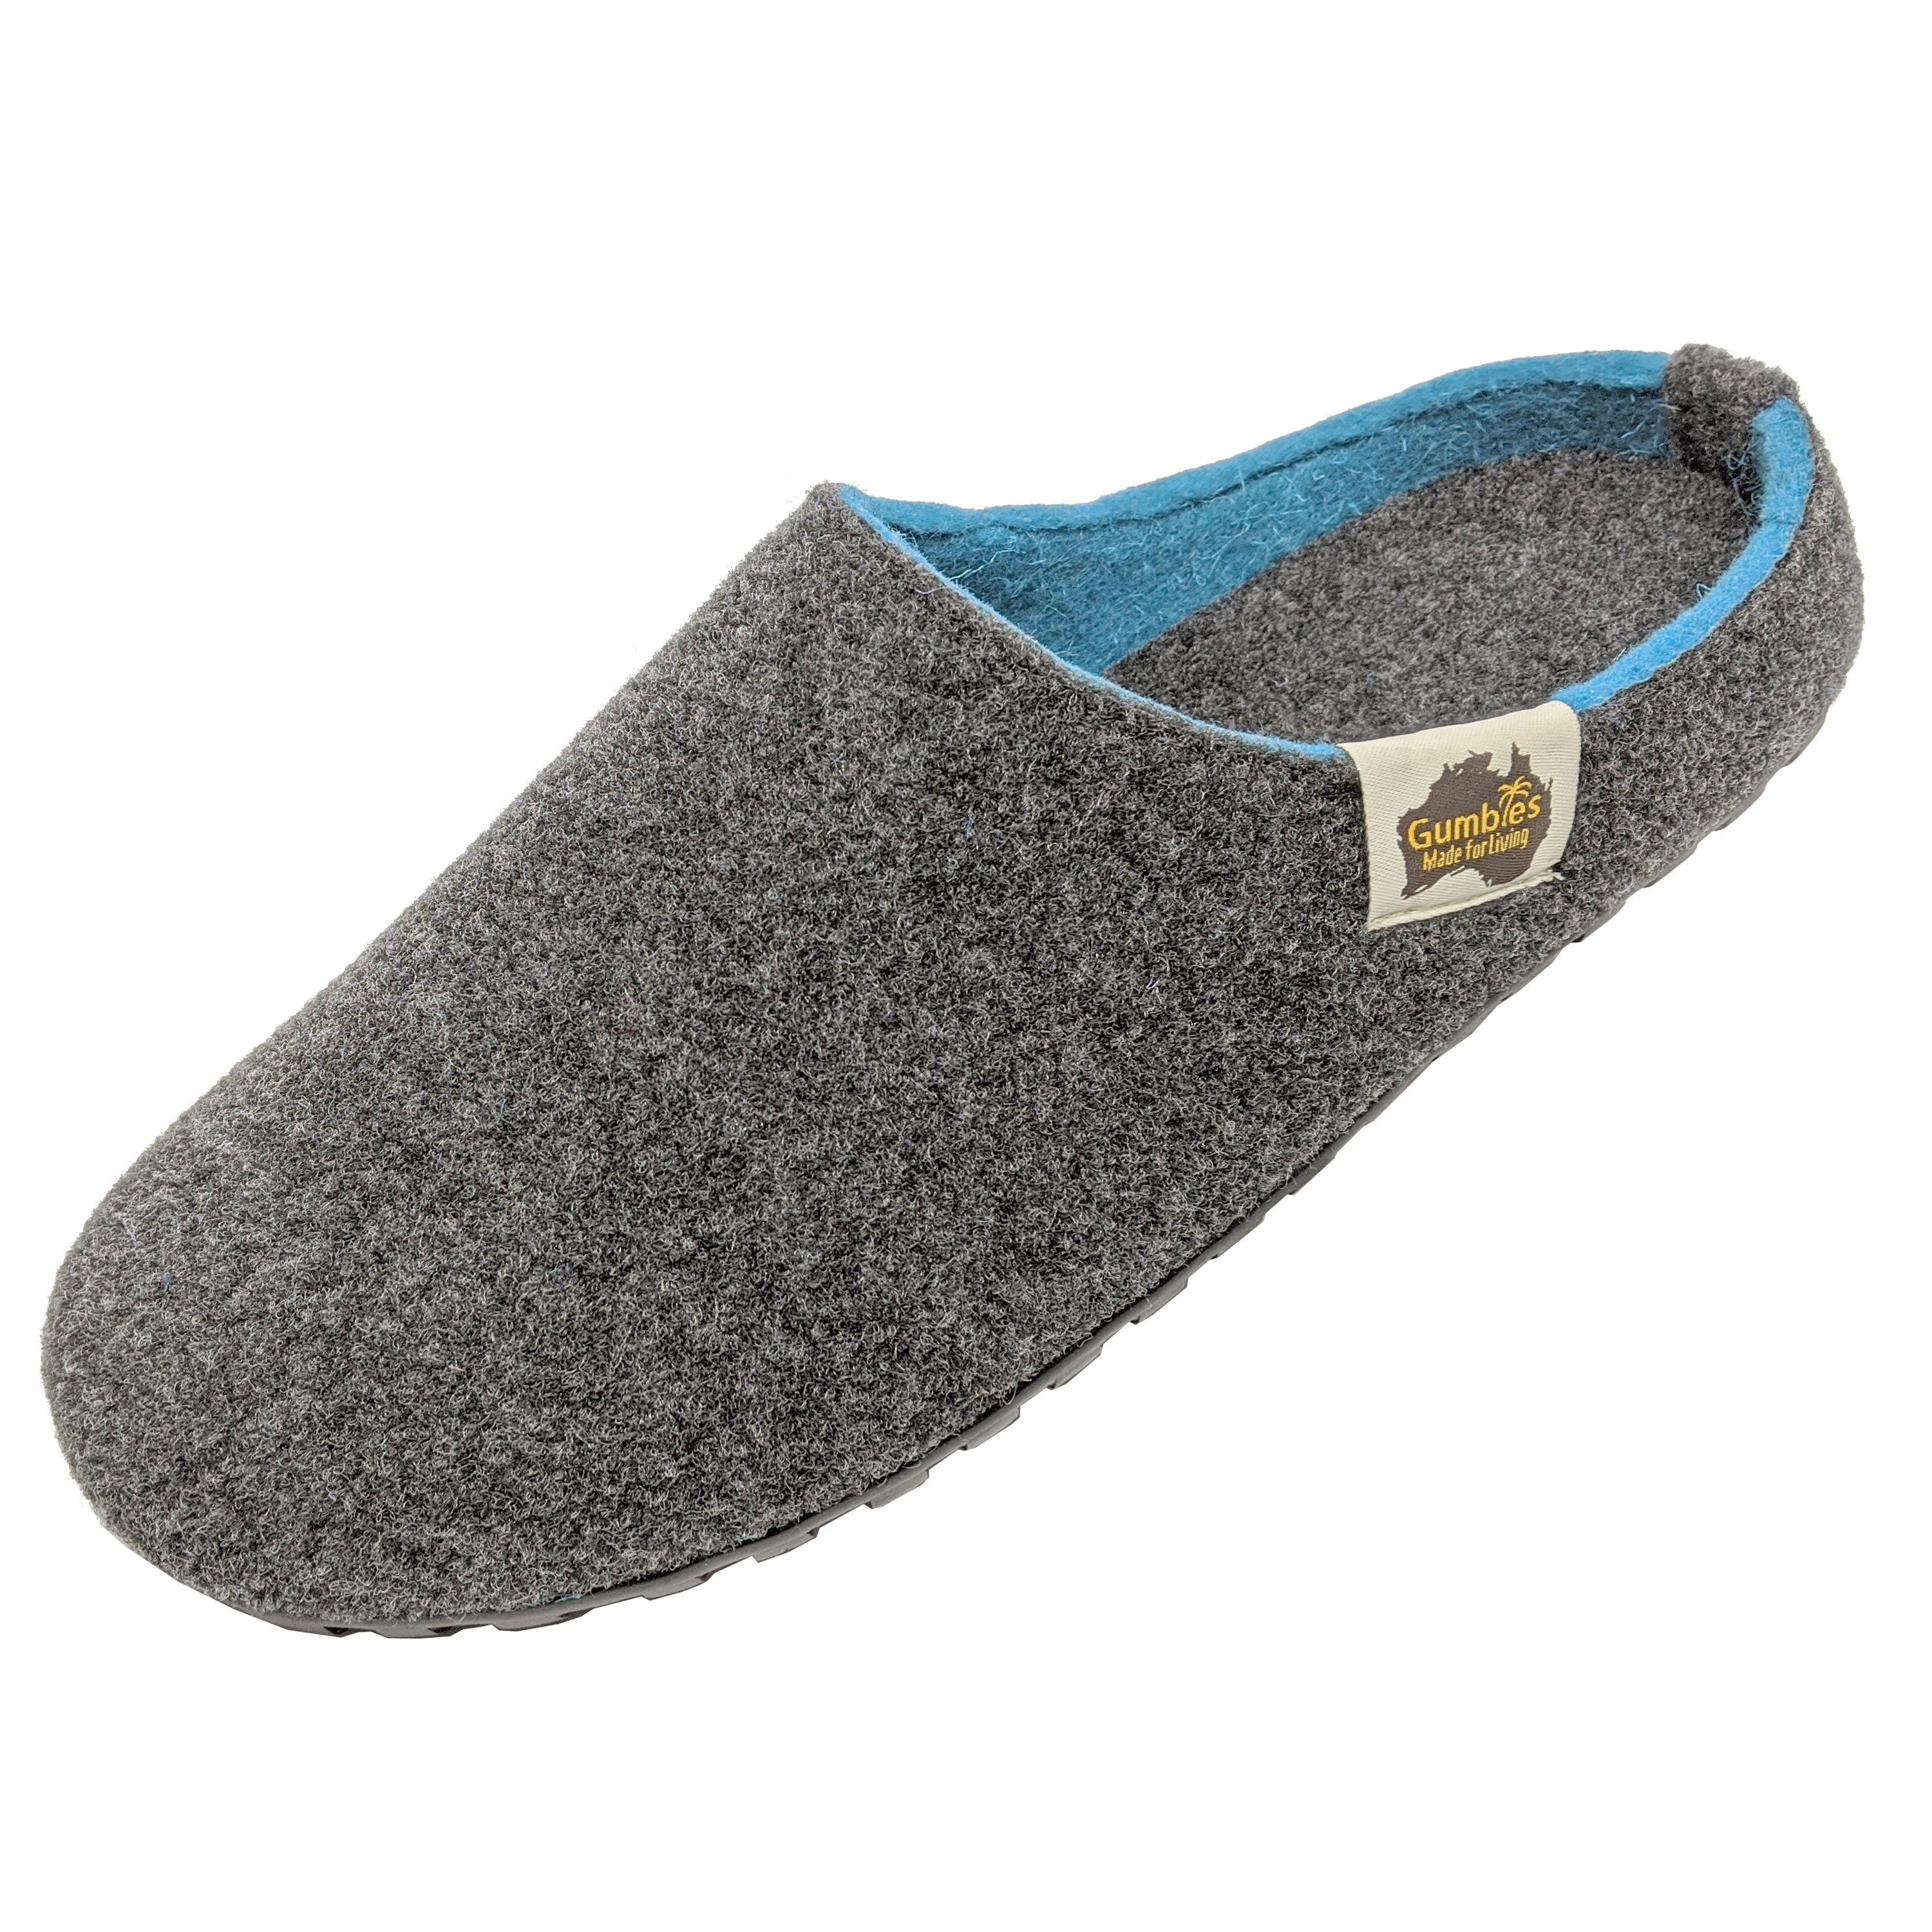 farbenfrohen »in Outback Charcoal Turquoise recycelten Hausschuh in charcoal-turquoise aus Gumbies Materialien Designs« Slipper